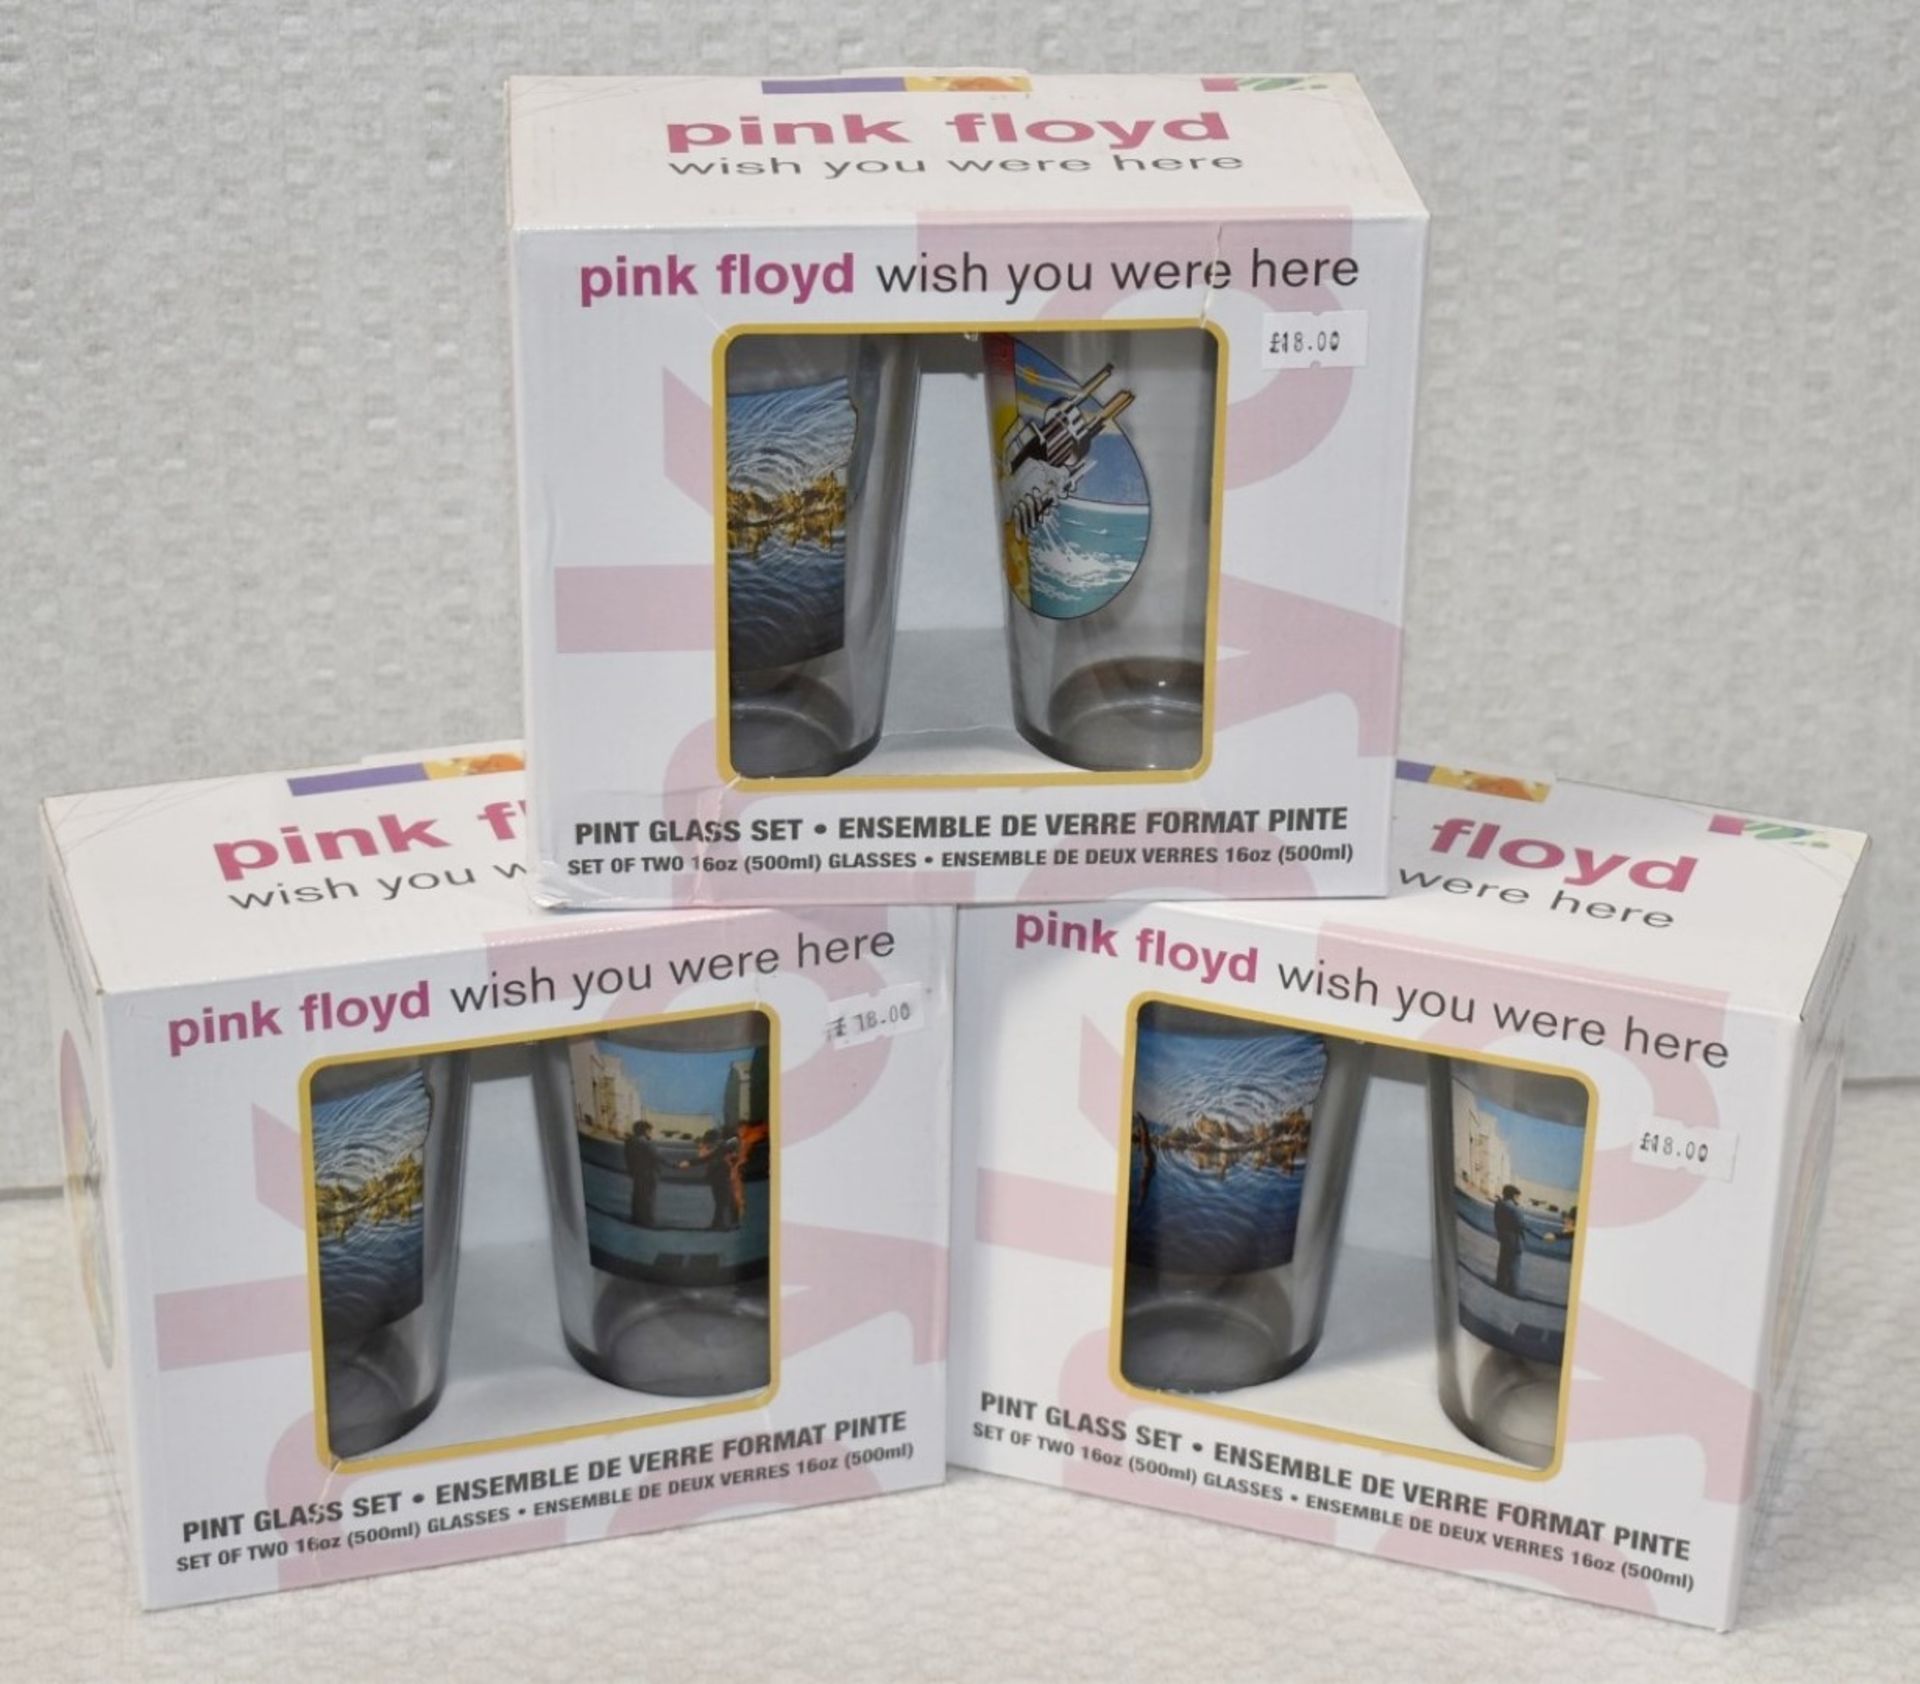 3 x Sets of Pink Floyd 'Wish You Were Here' Drinking Glass Gift Packs - Each Pack Contains 2 x 16oz - Image 8 of 8